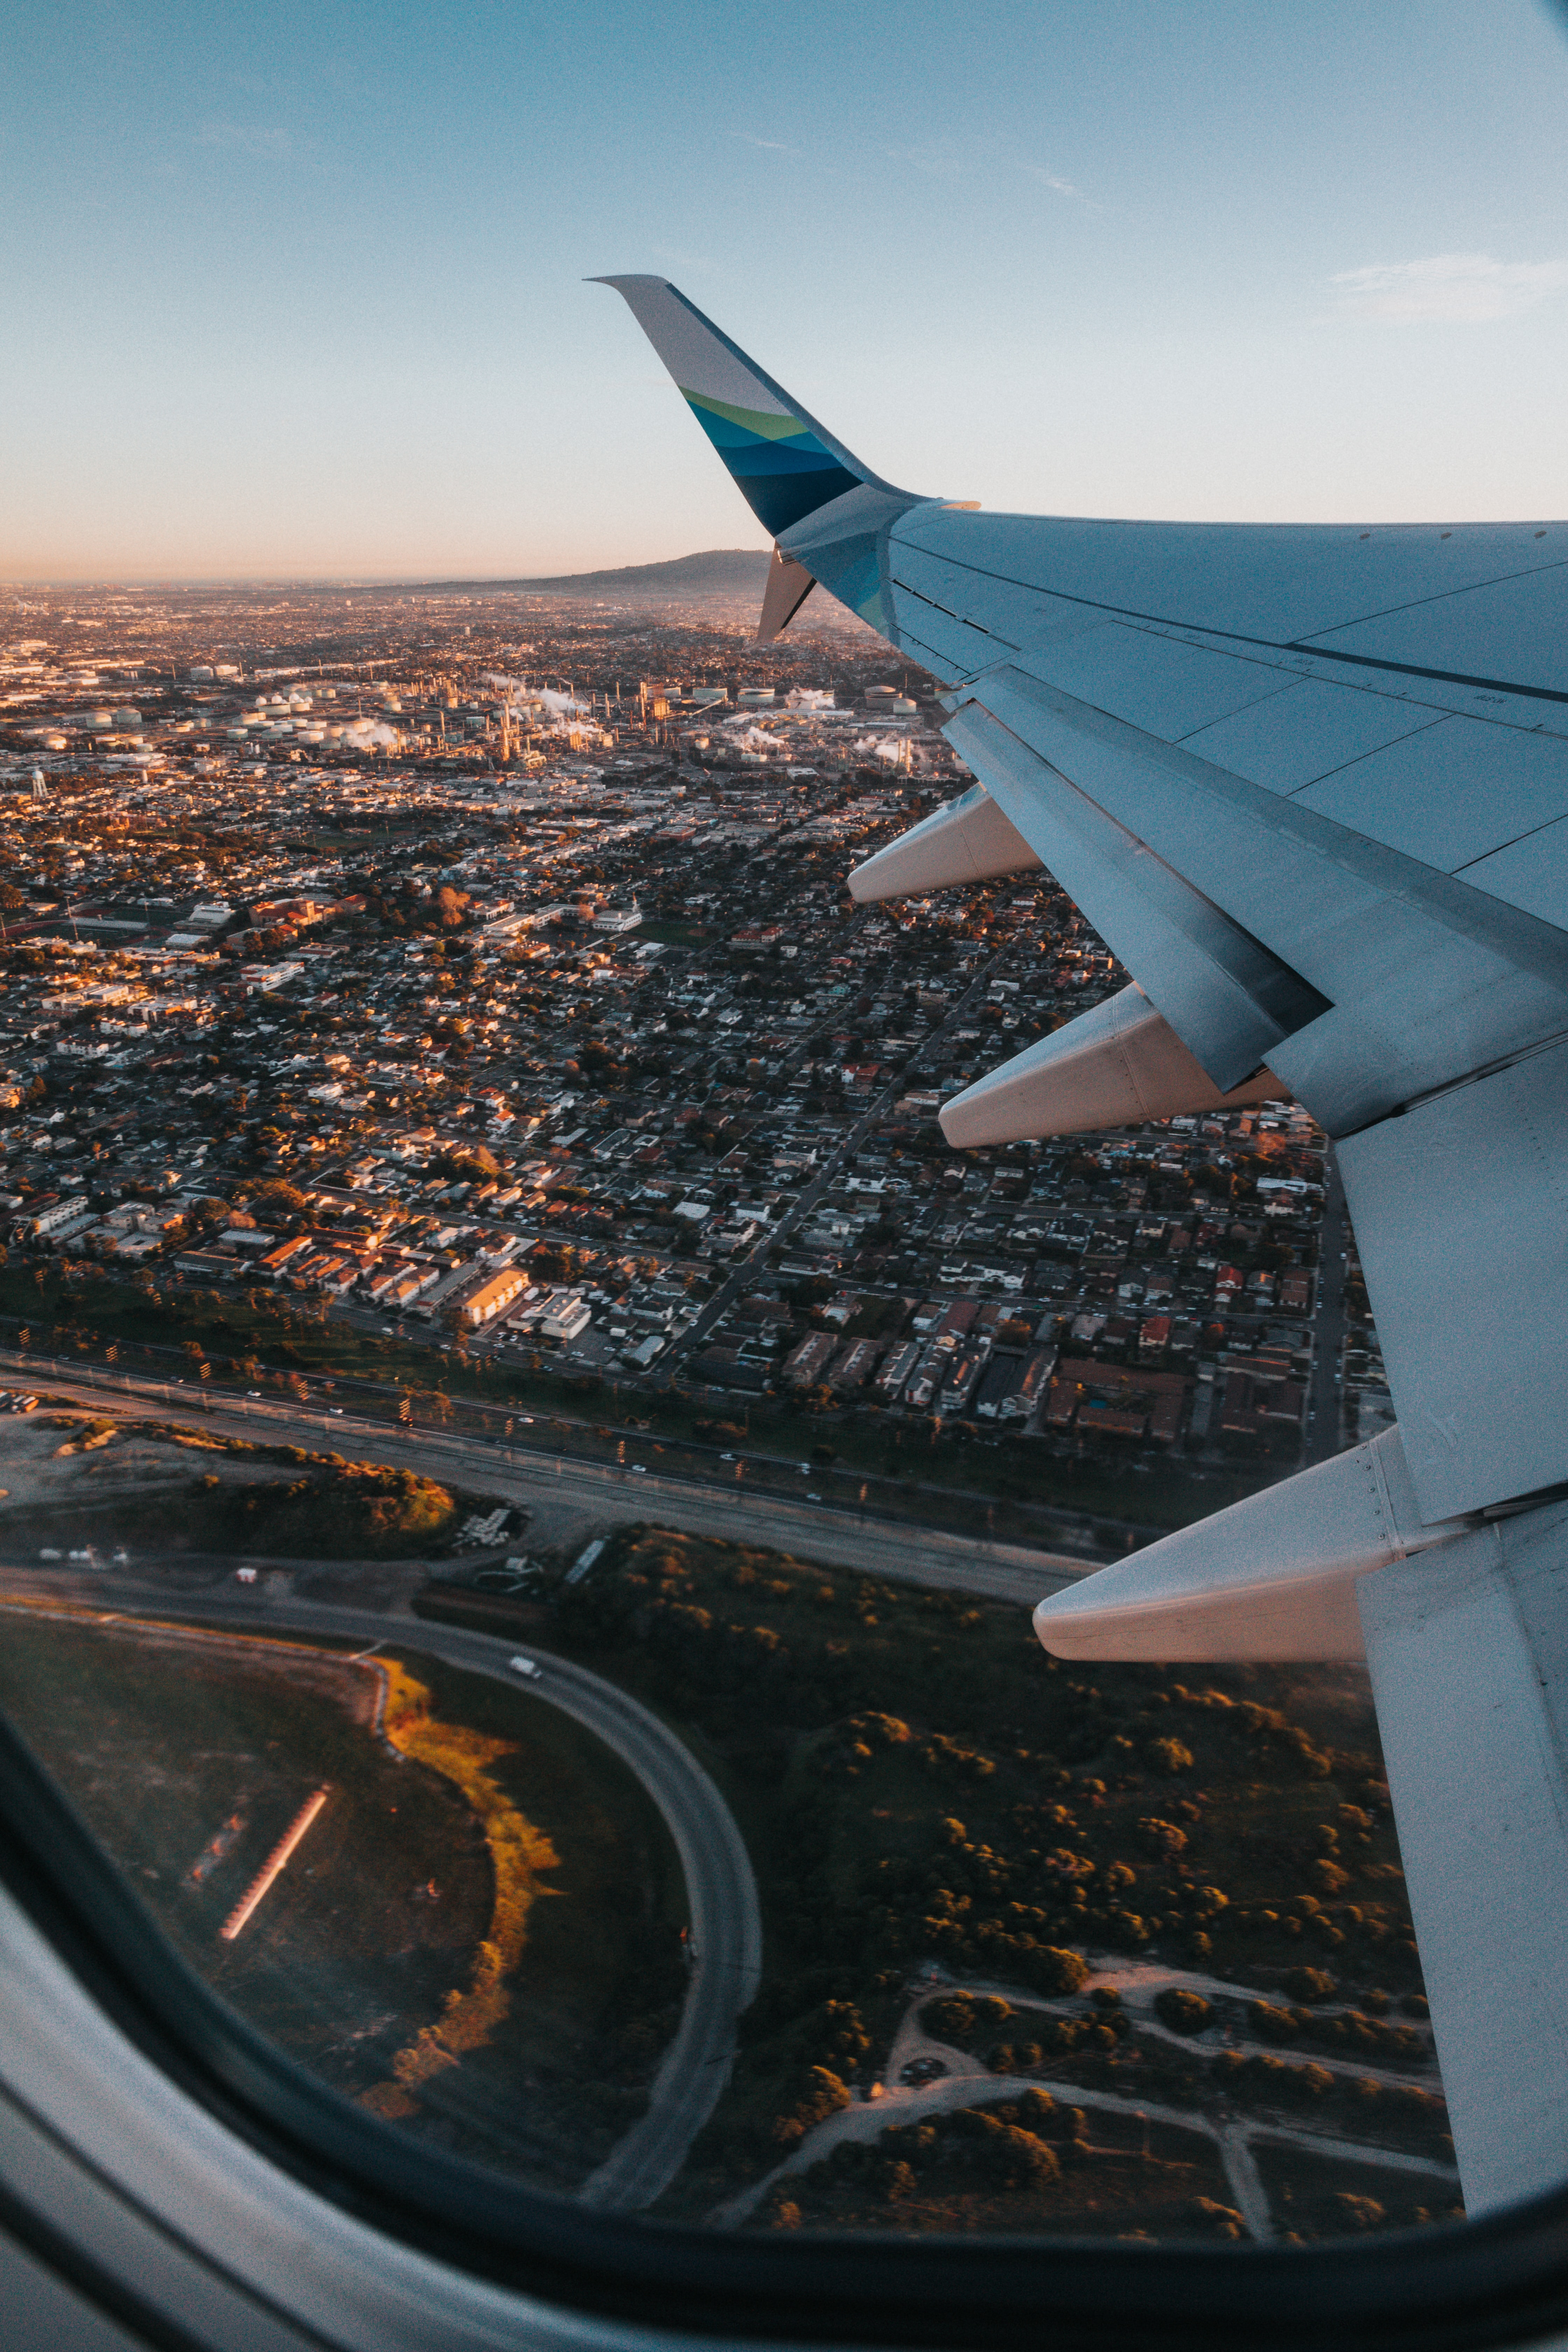 review, wing, plane, miscellaneous, airplane, city, view from above, miscellanea, overview UHD